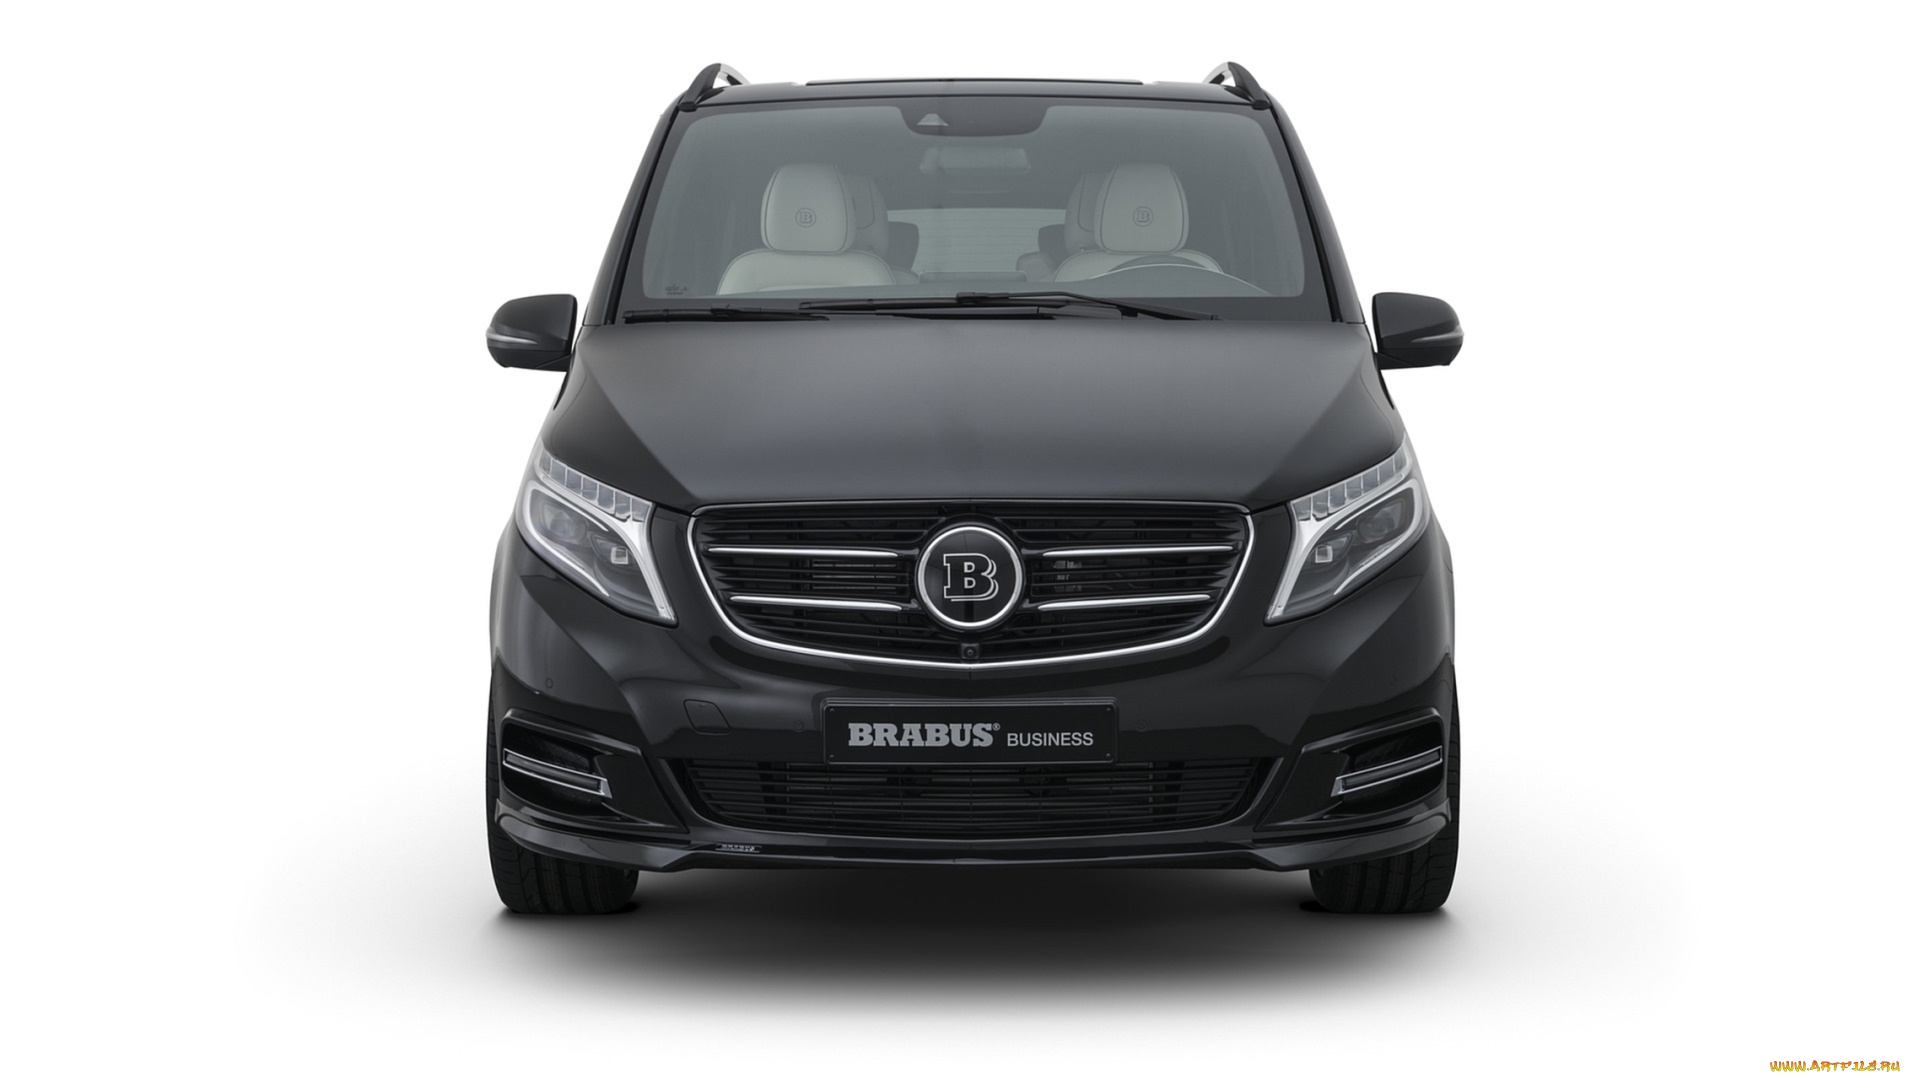 brabus, business, plus, based, on, mercedes-benz, v-class, 2018, автомобили, brabus, 2018, v-class, mercedes-benz, based, plus, business